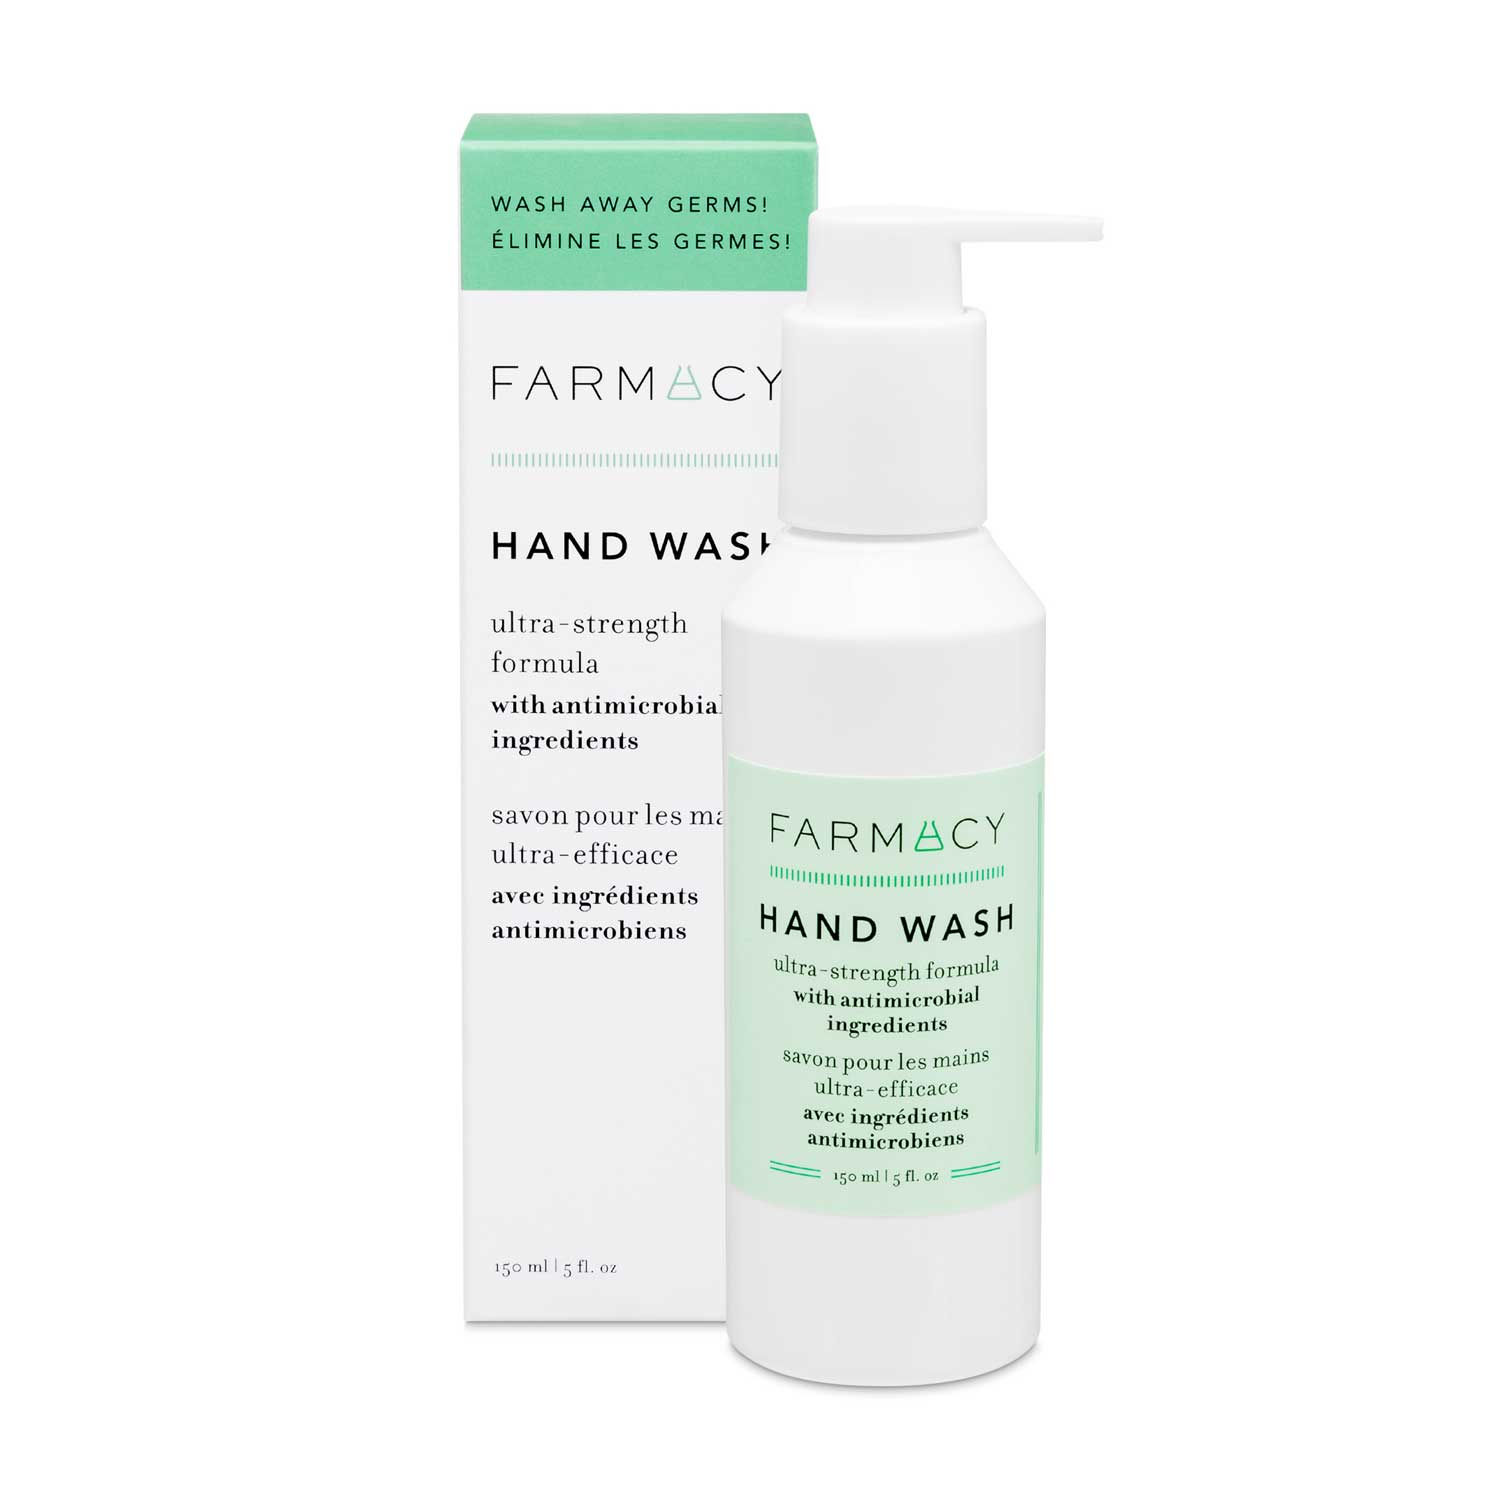 A box and bottle of Farmacy's Hand Wash side by side